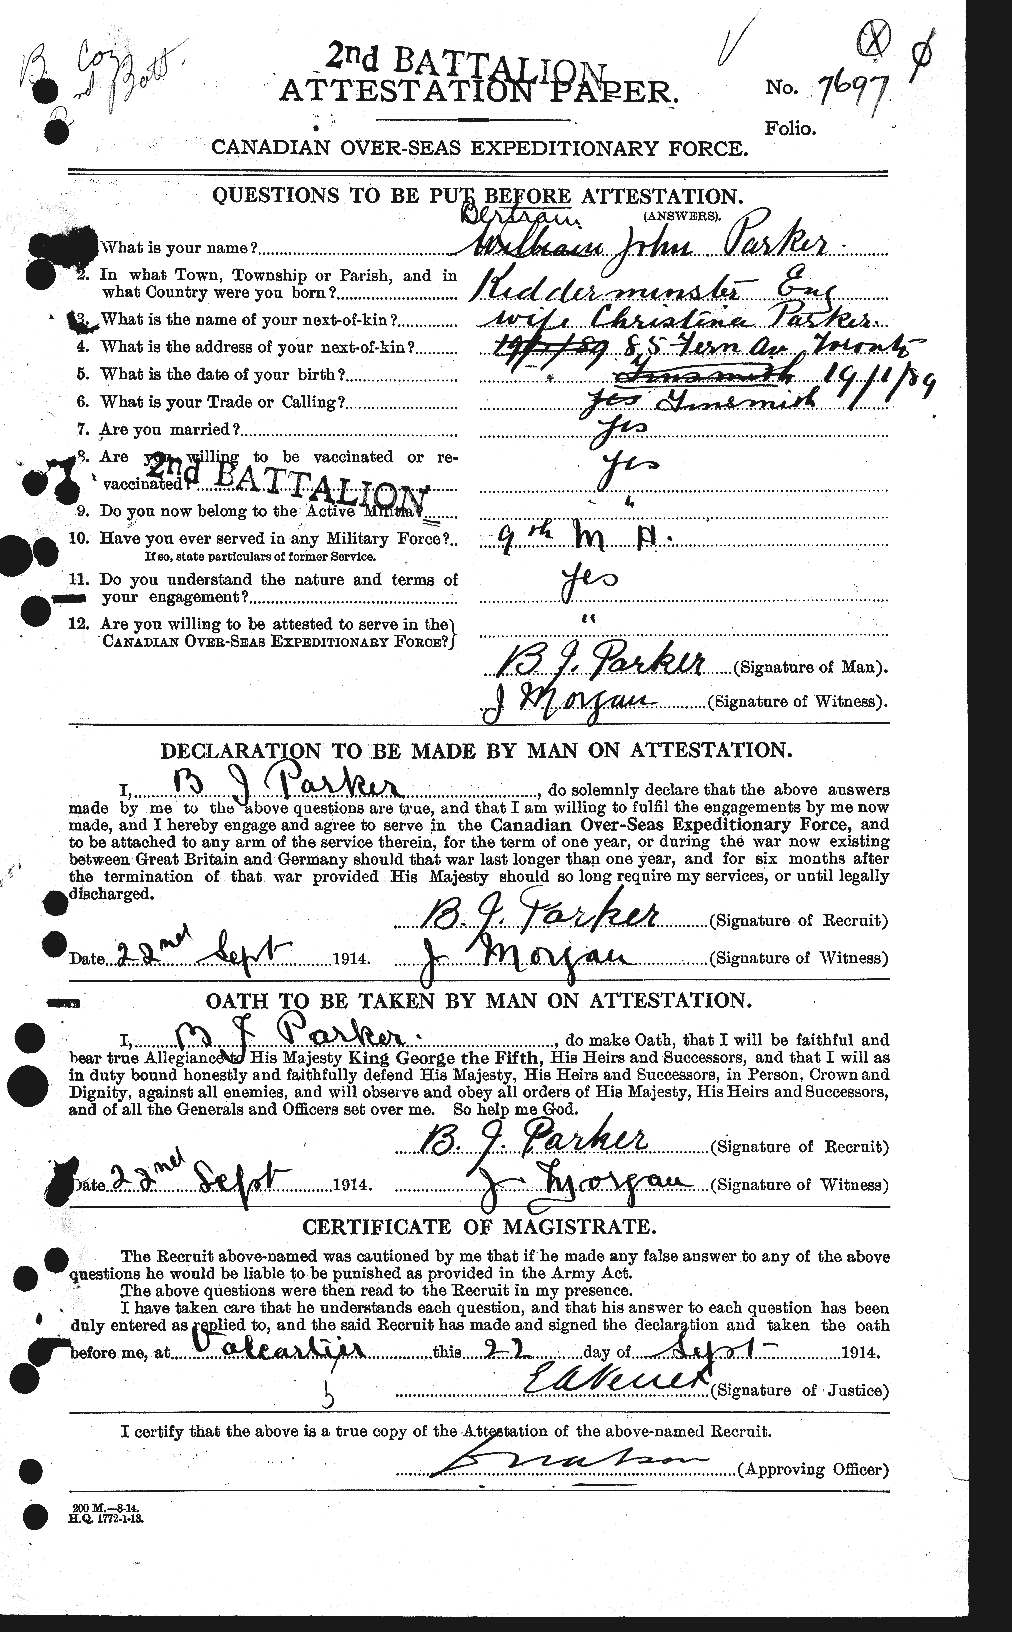 Personnel Records of the First World War - CEF 565047a